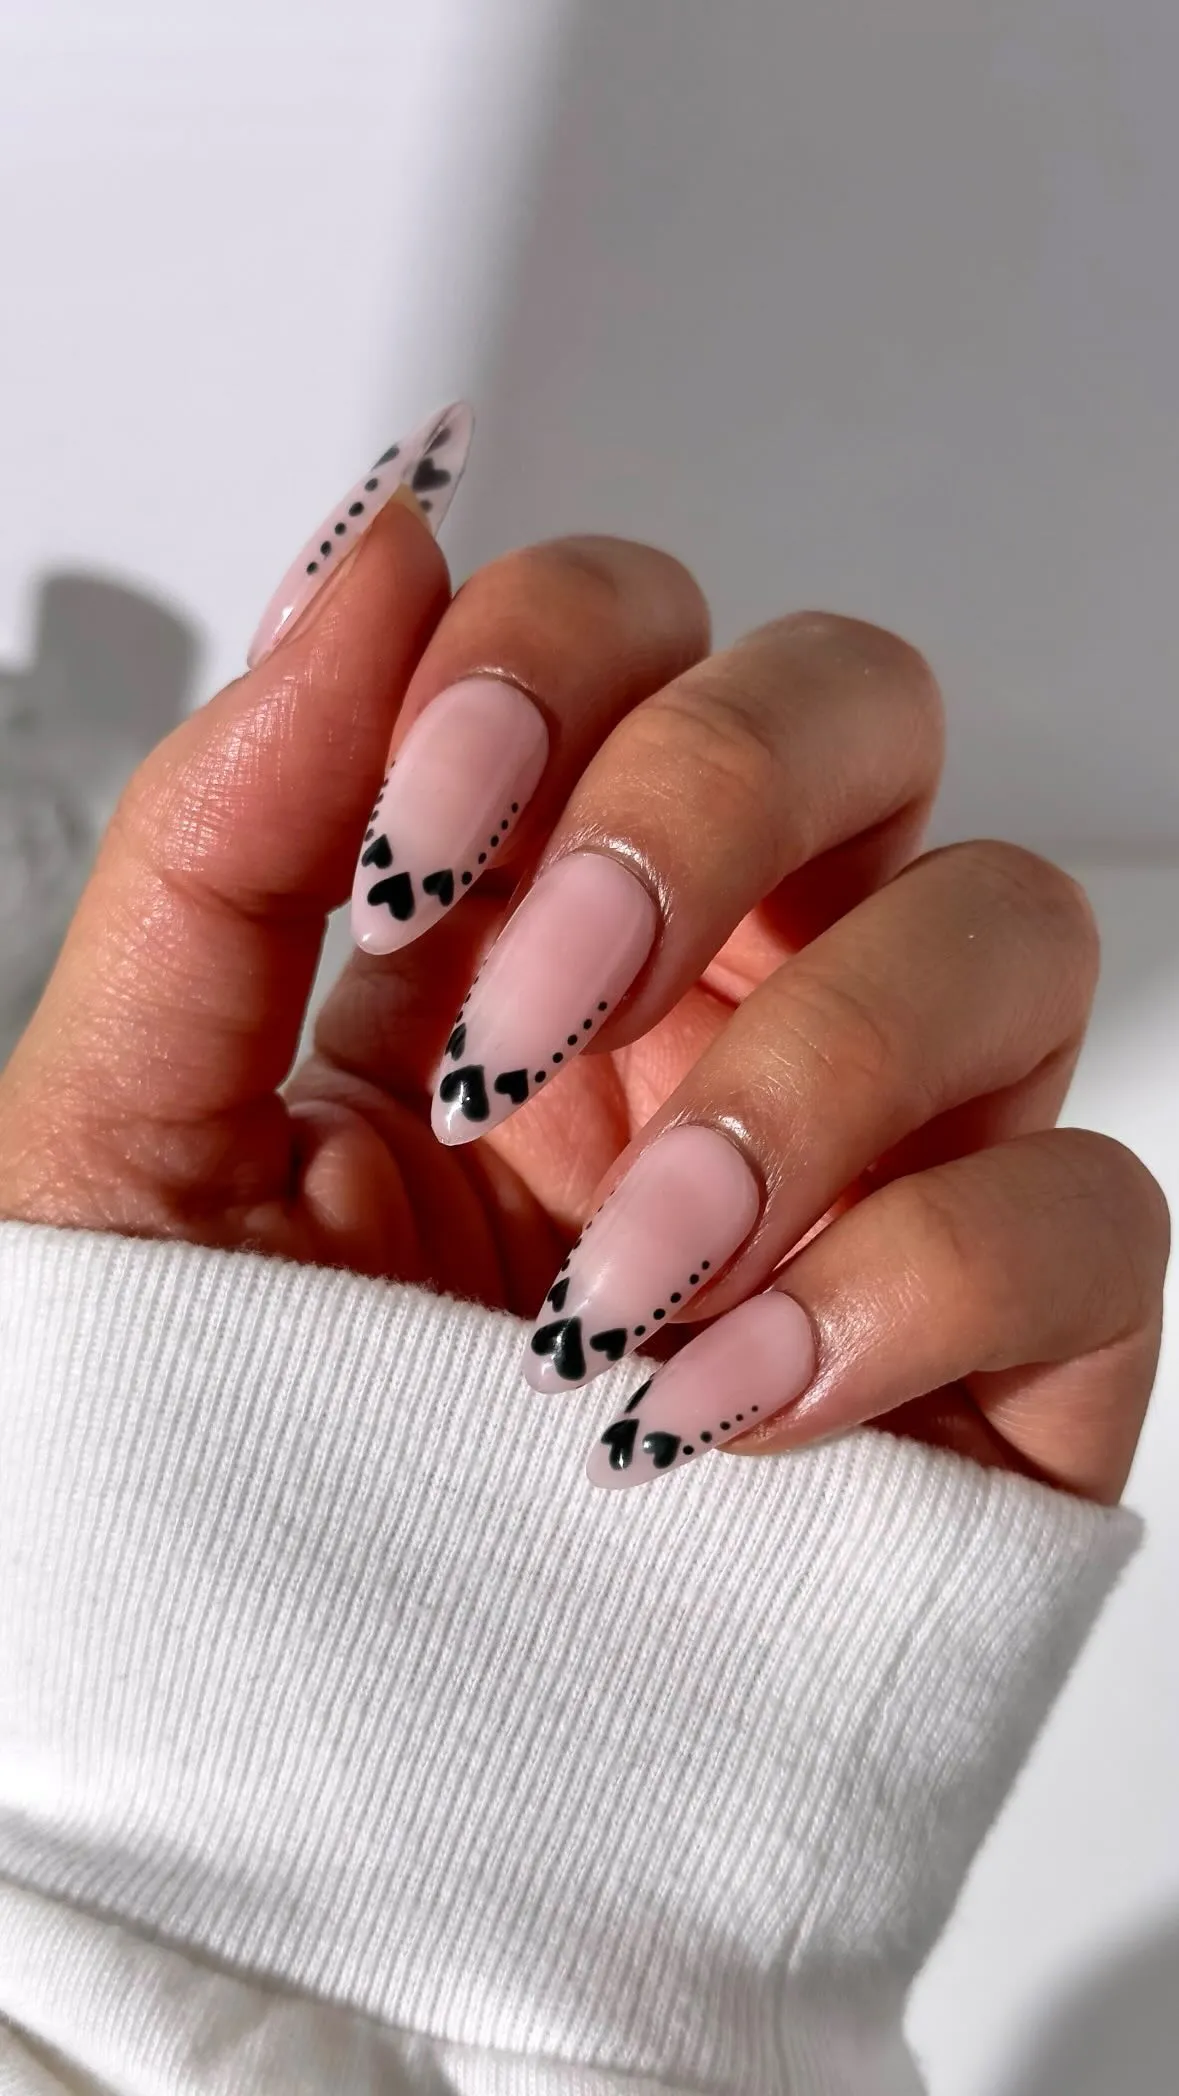 Modern Valentine's Nails: Delicate Love with Playful Hearts